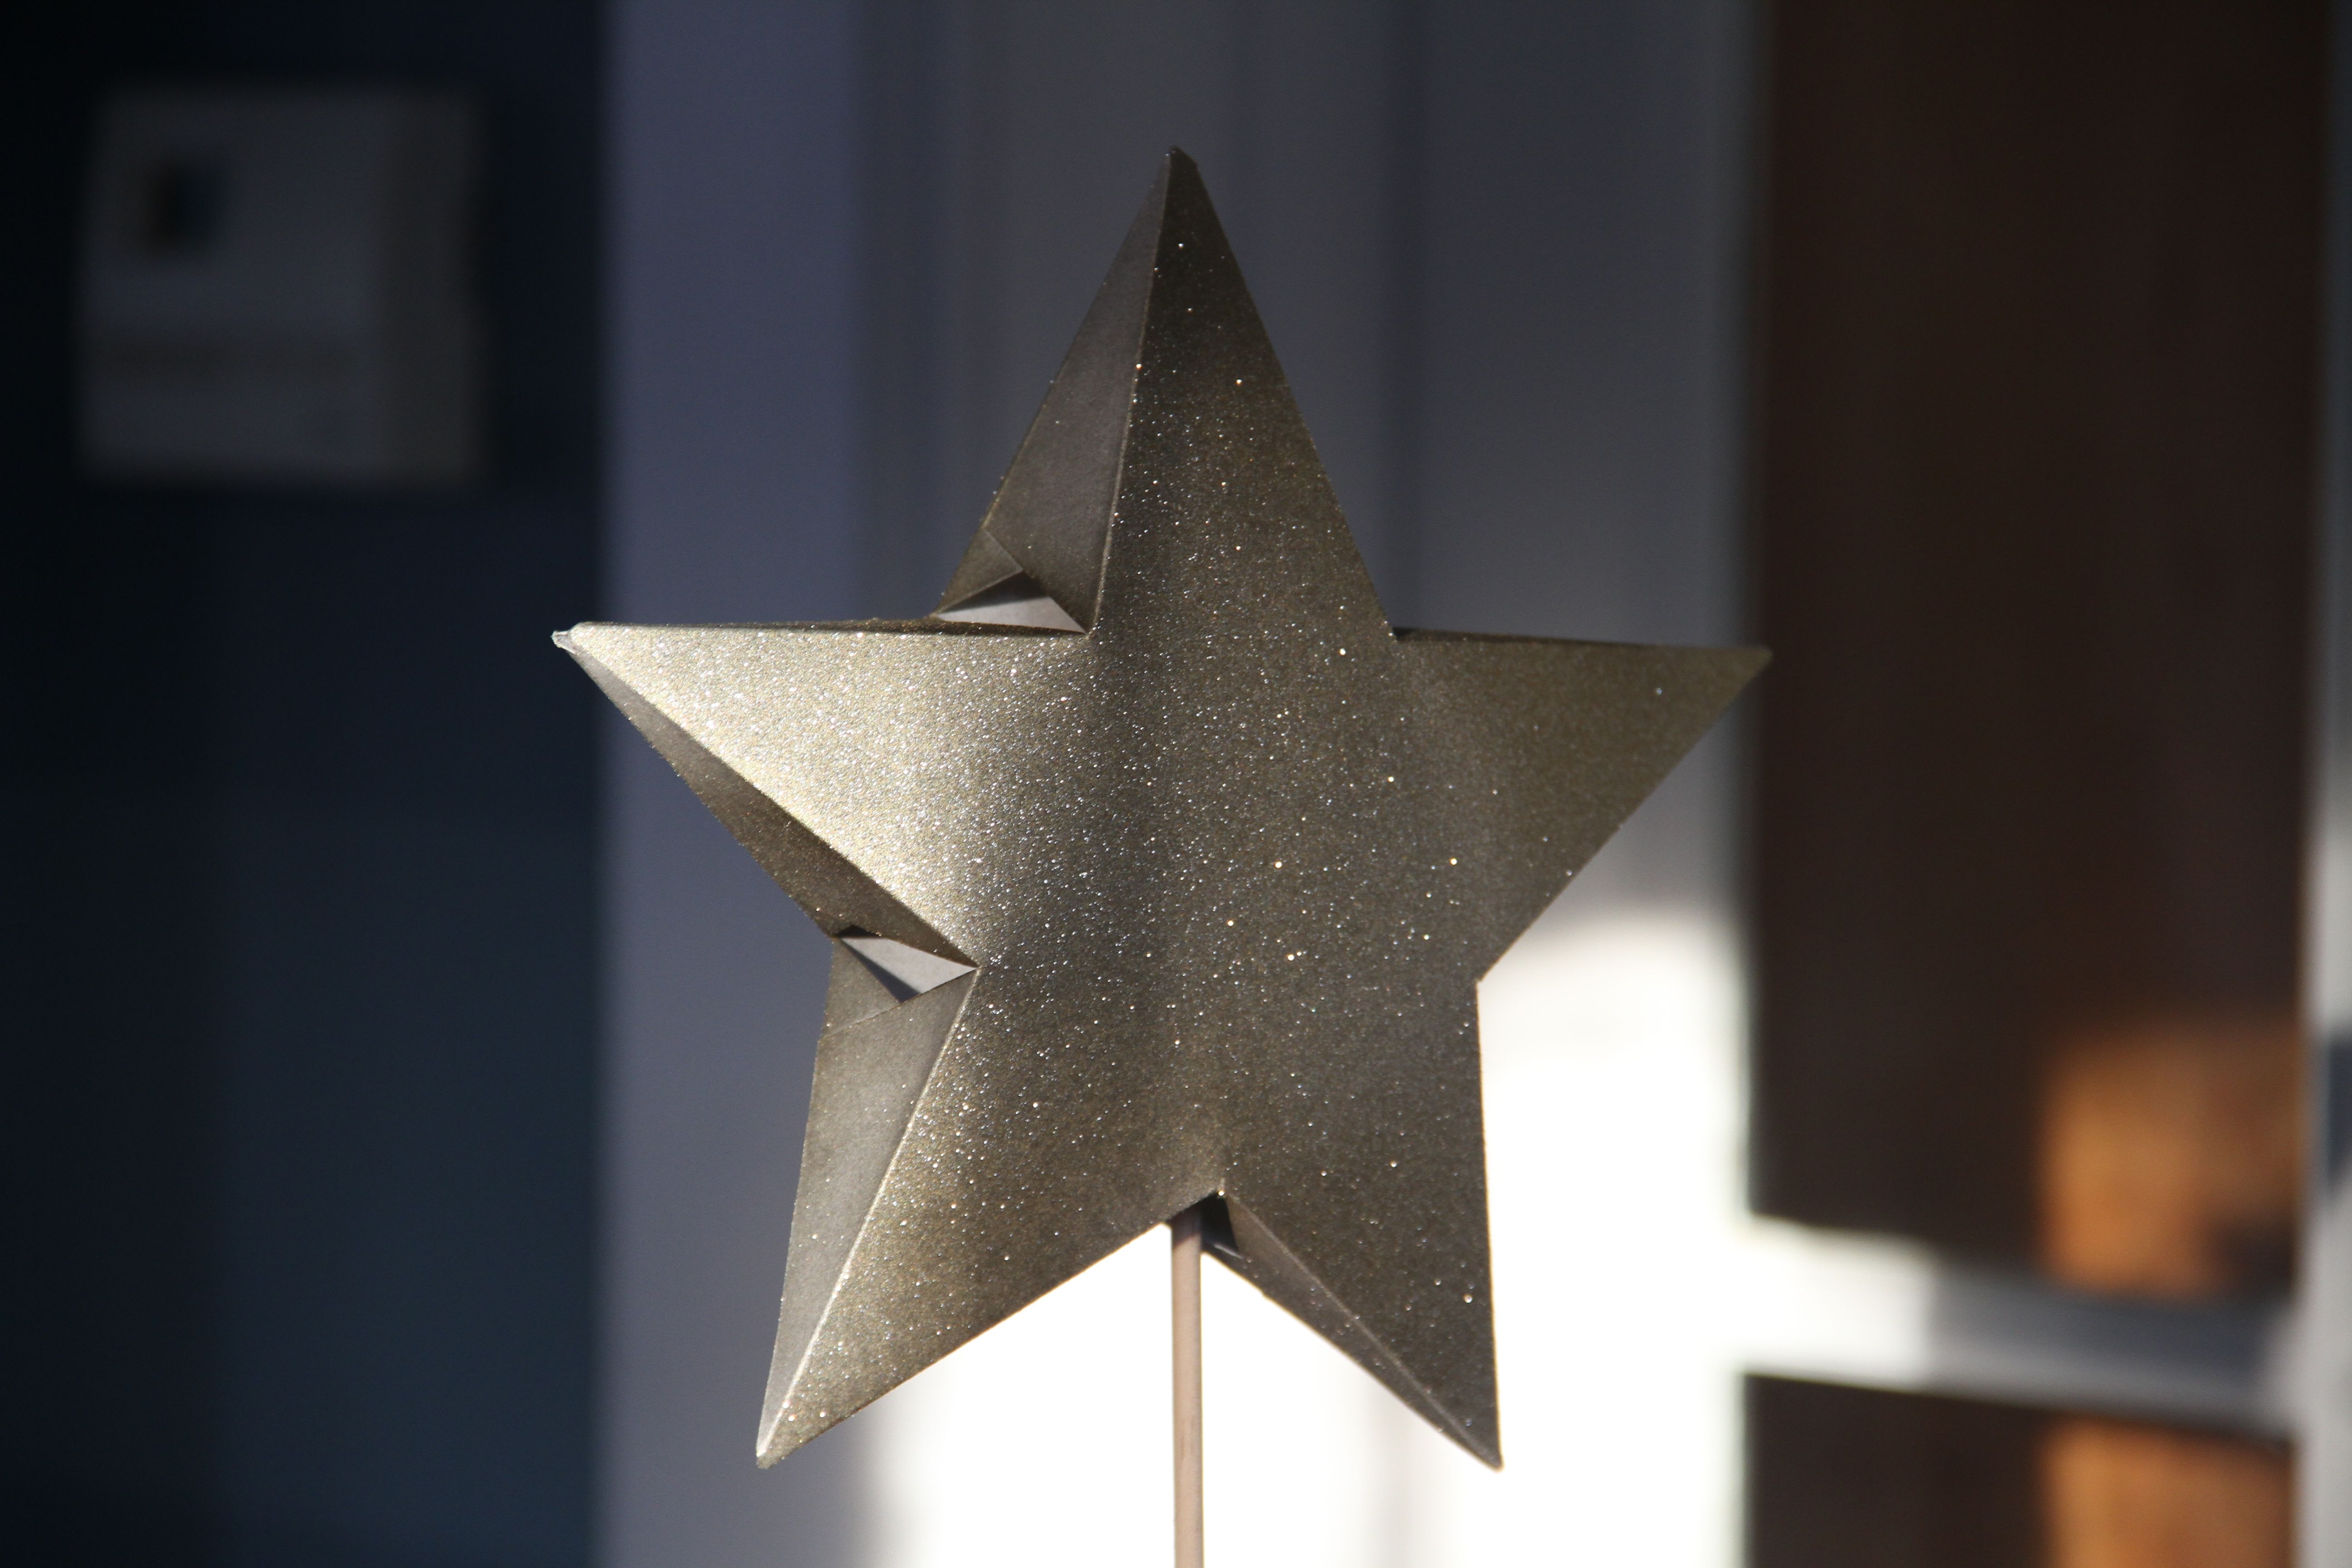 My star. When I was in 2nd or 3rd grade I "figured out" how to make this (I thought I had invented something amazing). The star is merely resting on one of the dowels I had for the trees - it stands alone and slips around the top of the tree when used as a topper.